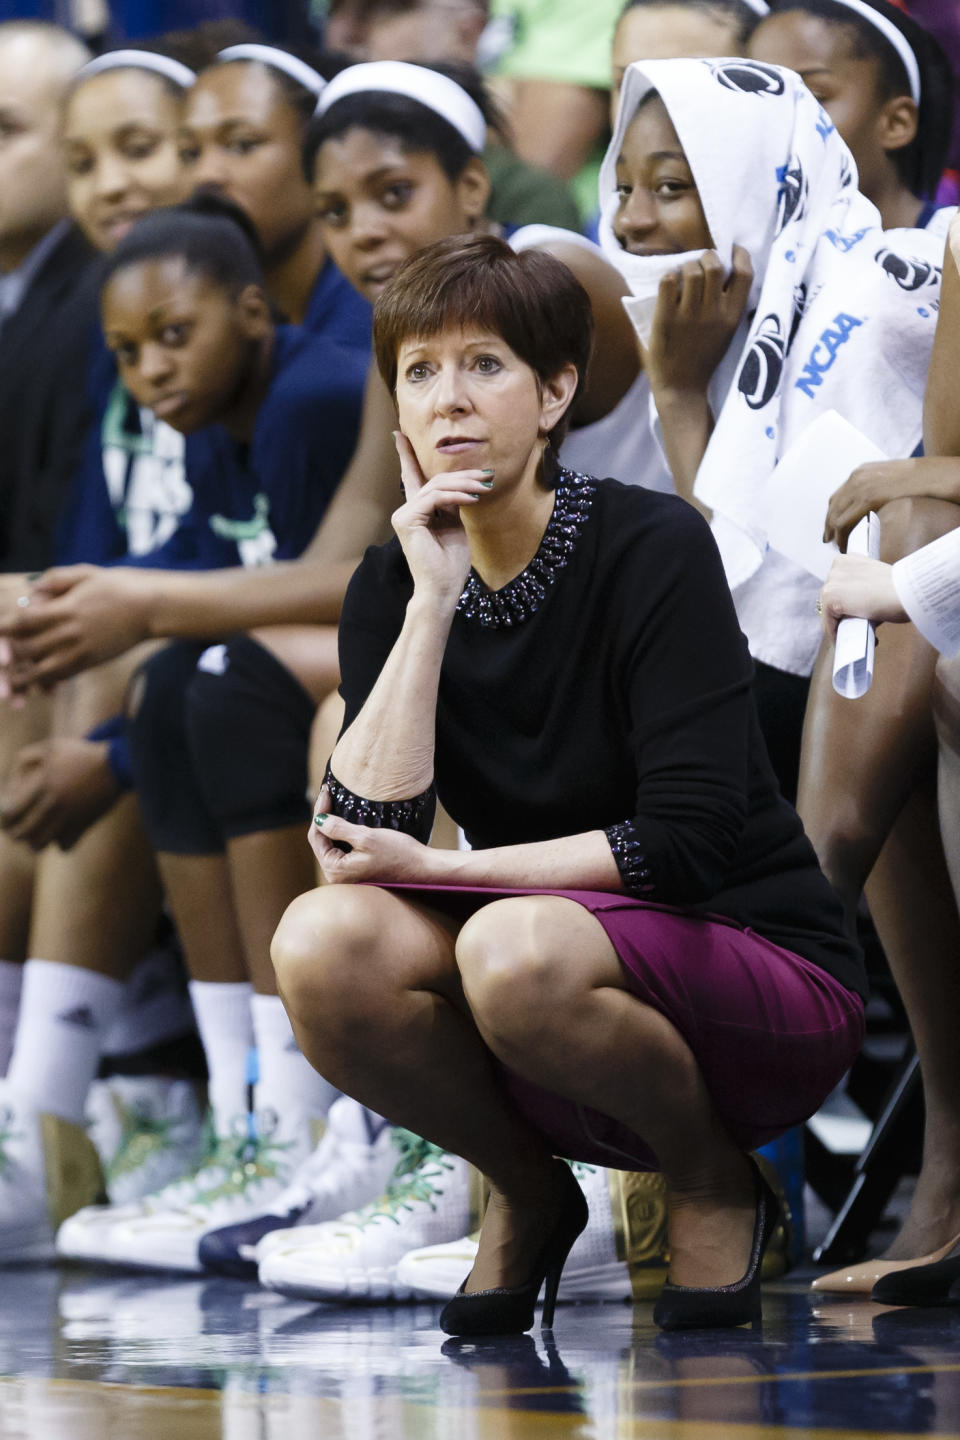 Notre Dame head coach Muffet McGraw watches her team play against Robert Morris during the second half in a first-round game in the NCAA women's college basketball tournament, Saturday, March 22, 2014, in Toledo, Ohio. Notre Dame defeated Robert Morris 93-42. (AP Photo/Rick Osentoski)